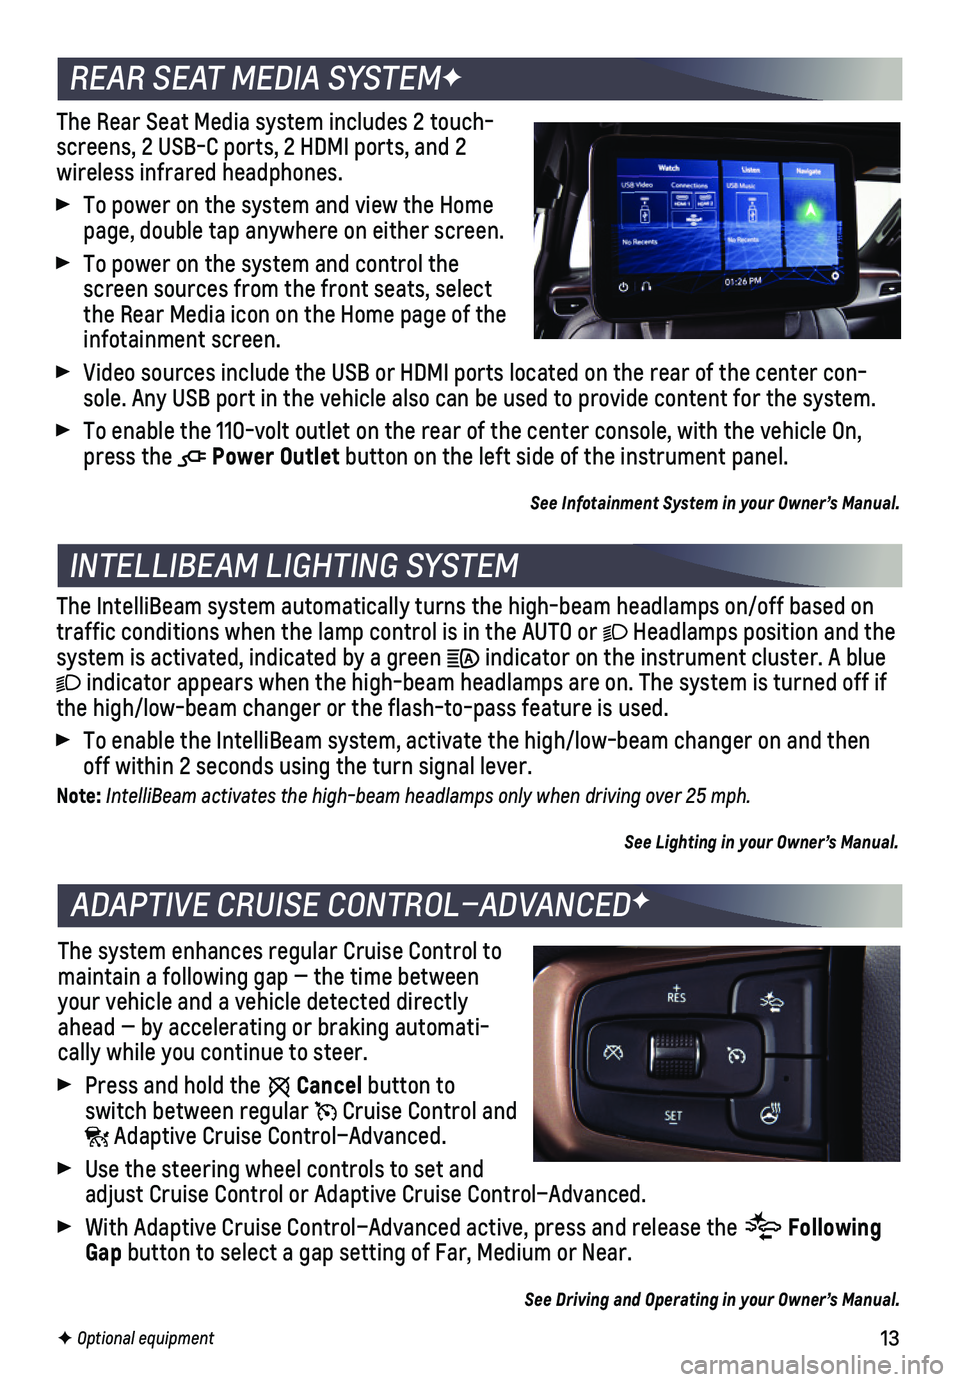 CHEVROLET TAHOE 2021  Get To Know Guide 13F Optional equipment  
The Rear Seat Media system includes 2 touch-screens, 2 USB-C ports, 2 HDMI ports, and 2  
wireless infrared headphones.
 To power on the system and view the Home page, double 